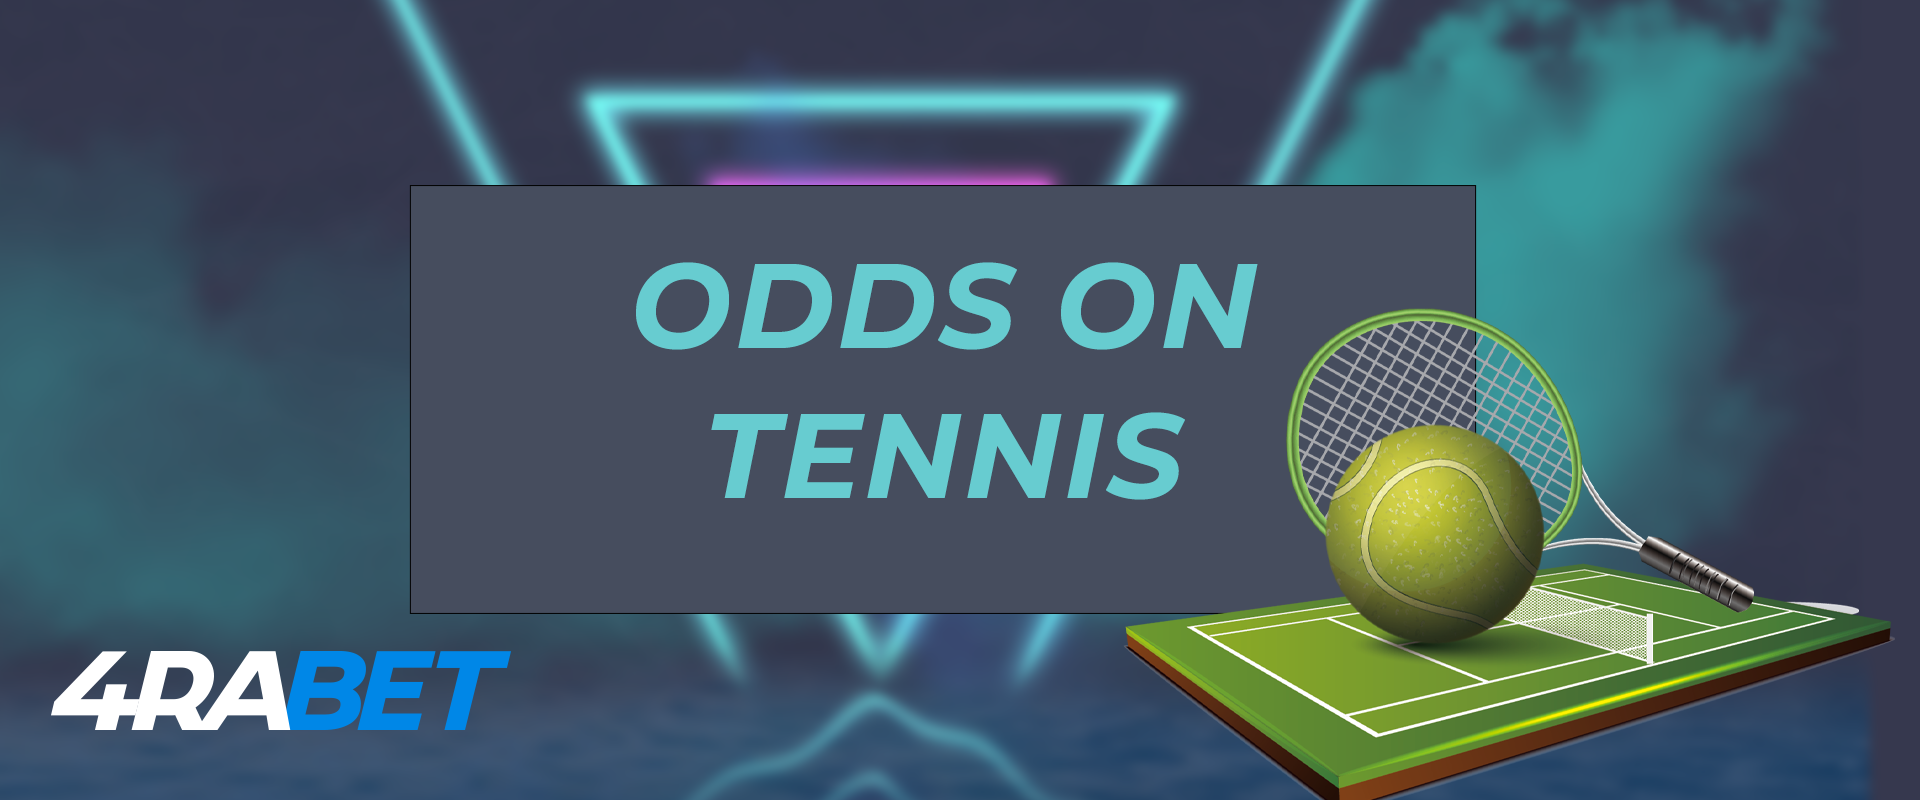 The most popular odds on tennis events.